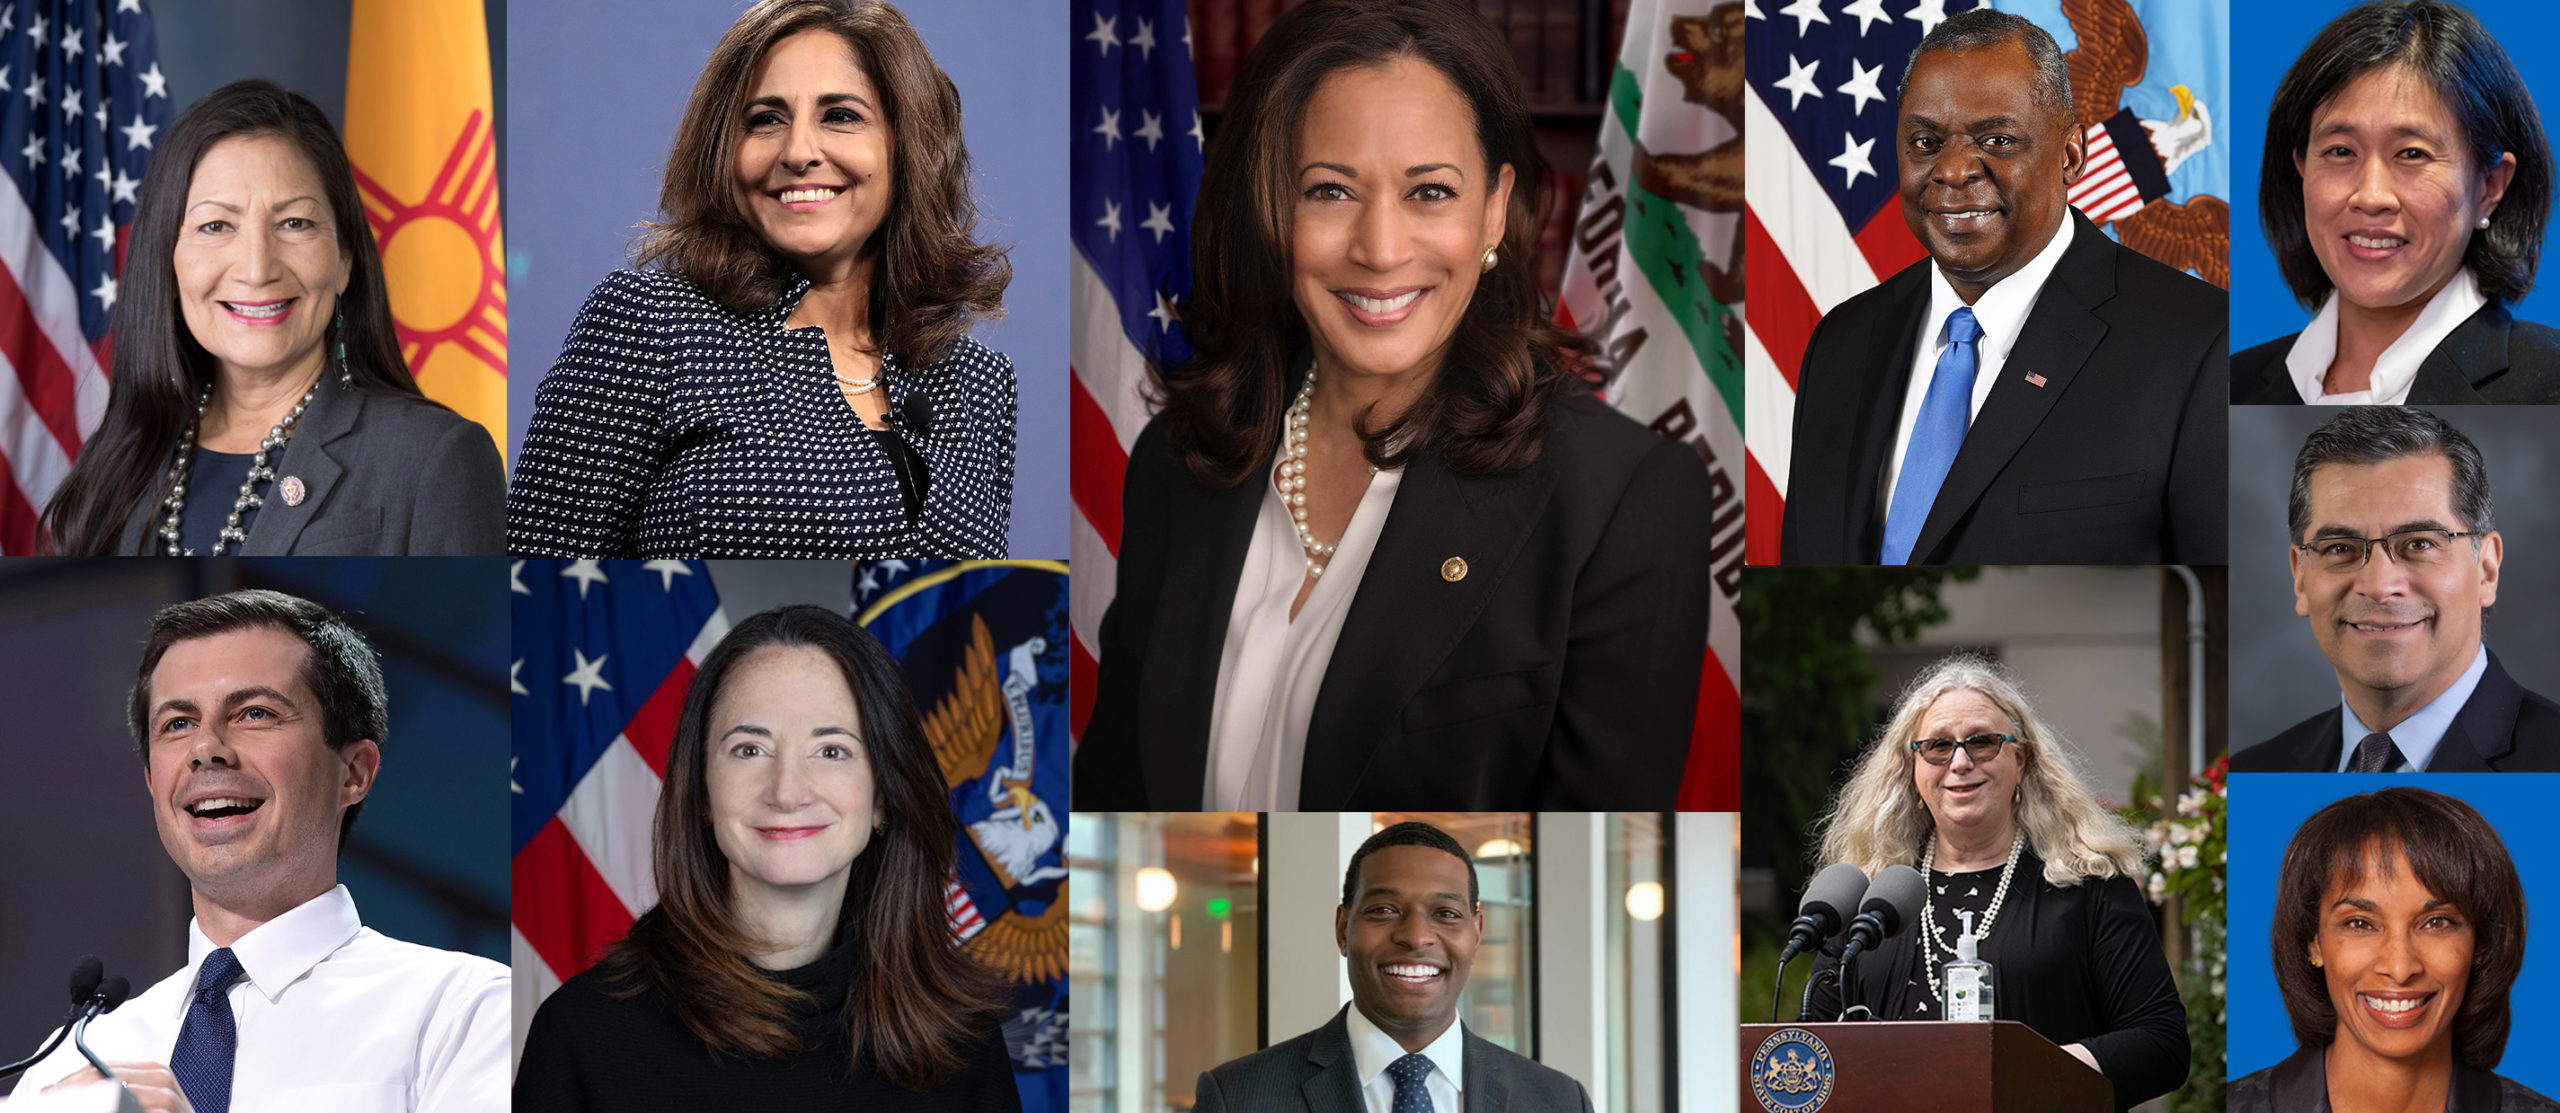 Featured image for “It’s About Time: A New Era of Diverse U.S. Leadership”